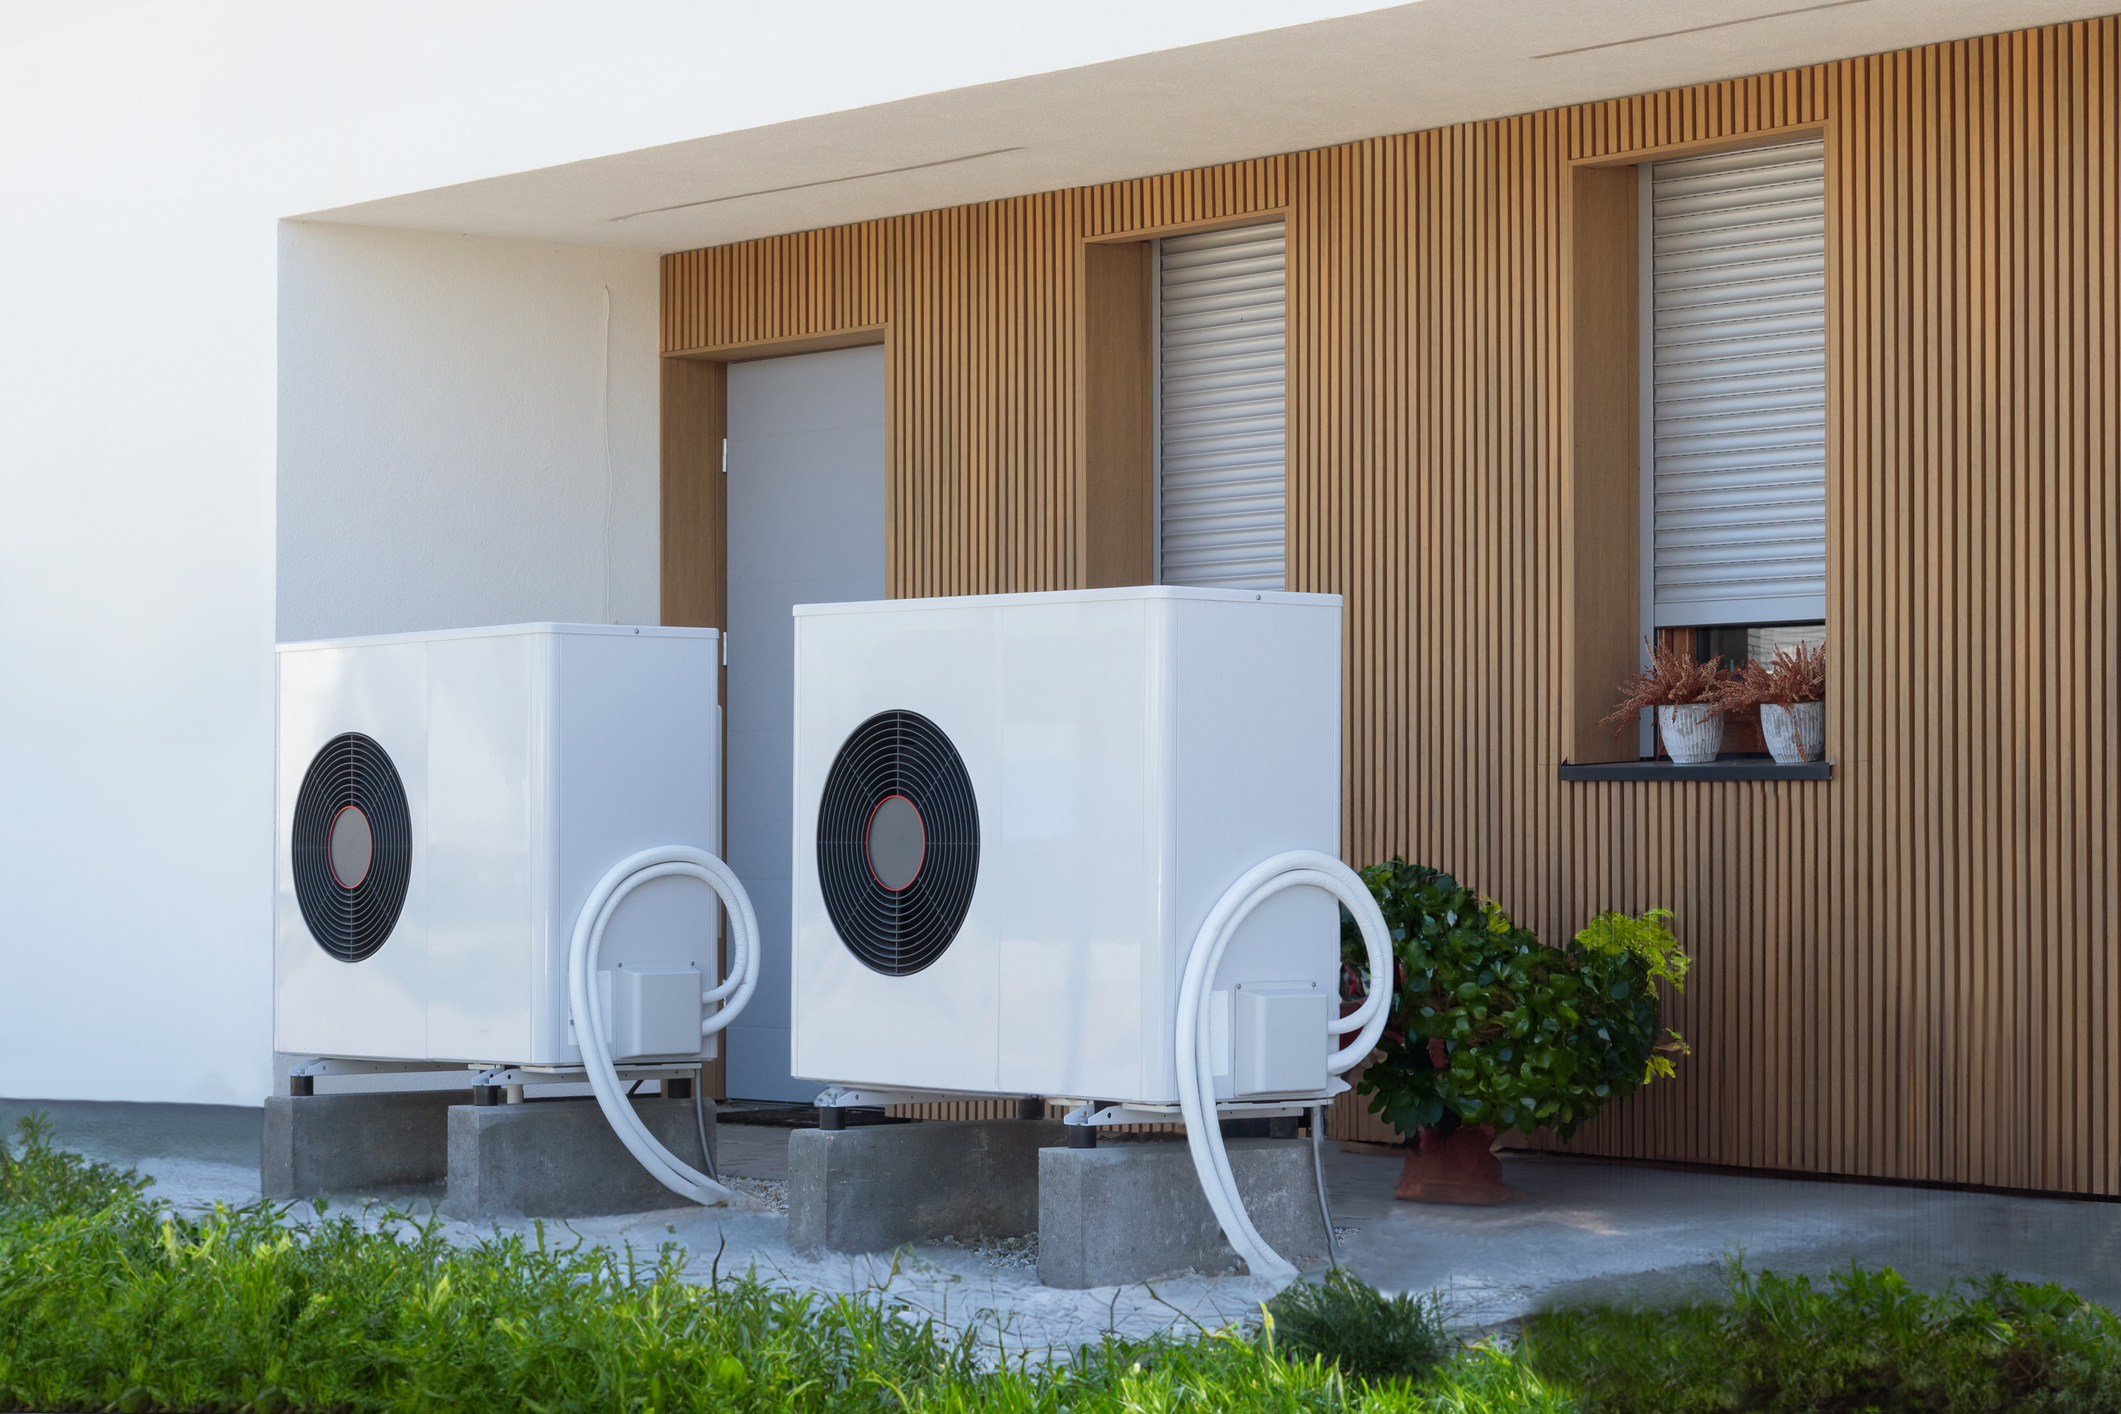 Two white electric heat pumps plugged outdoors and in front of modern home.